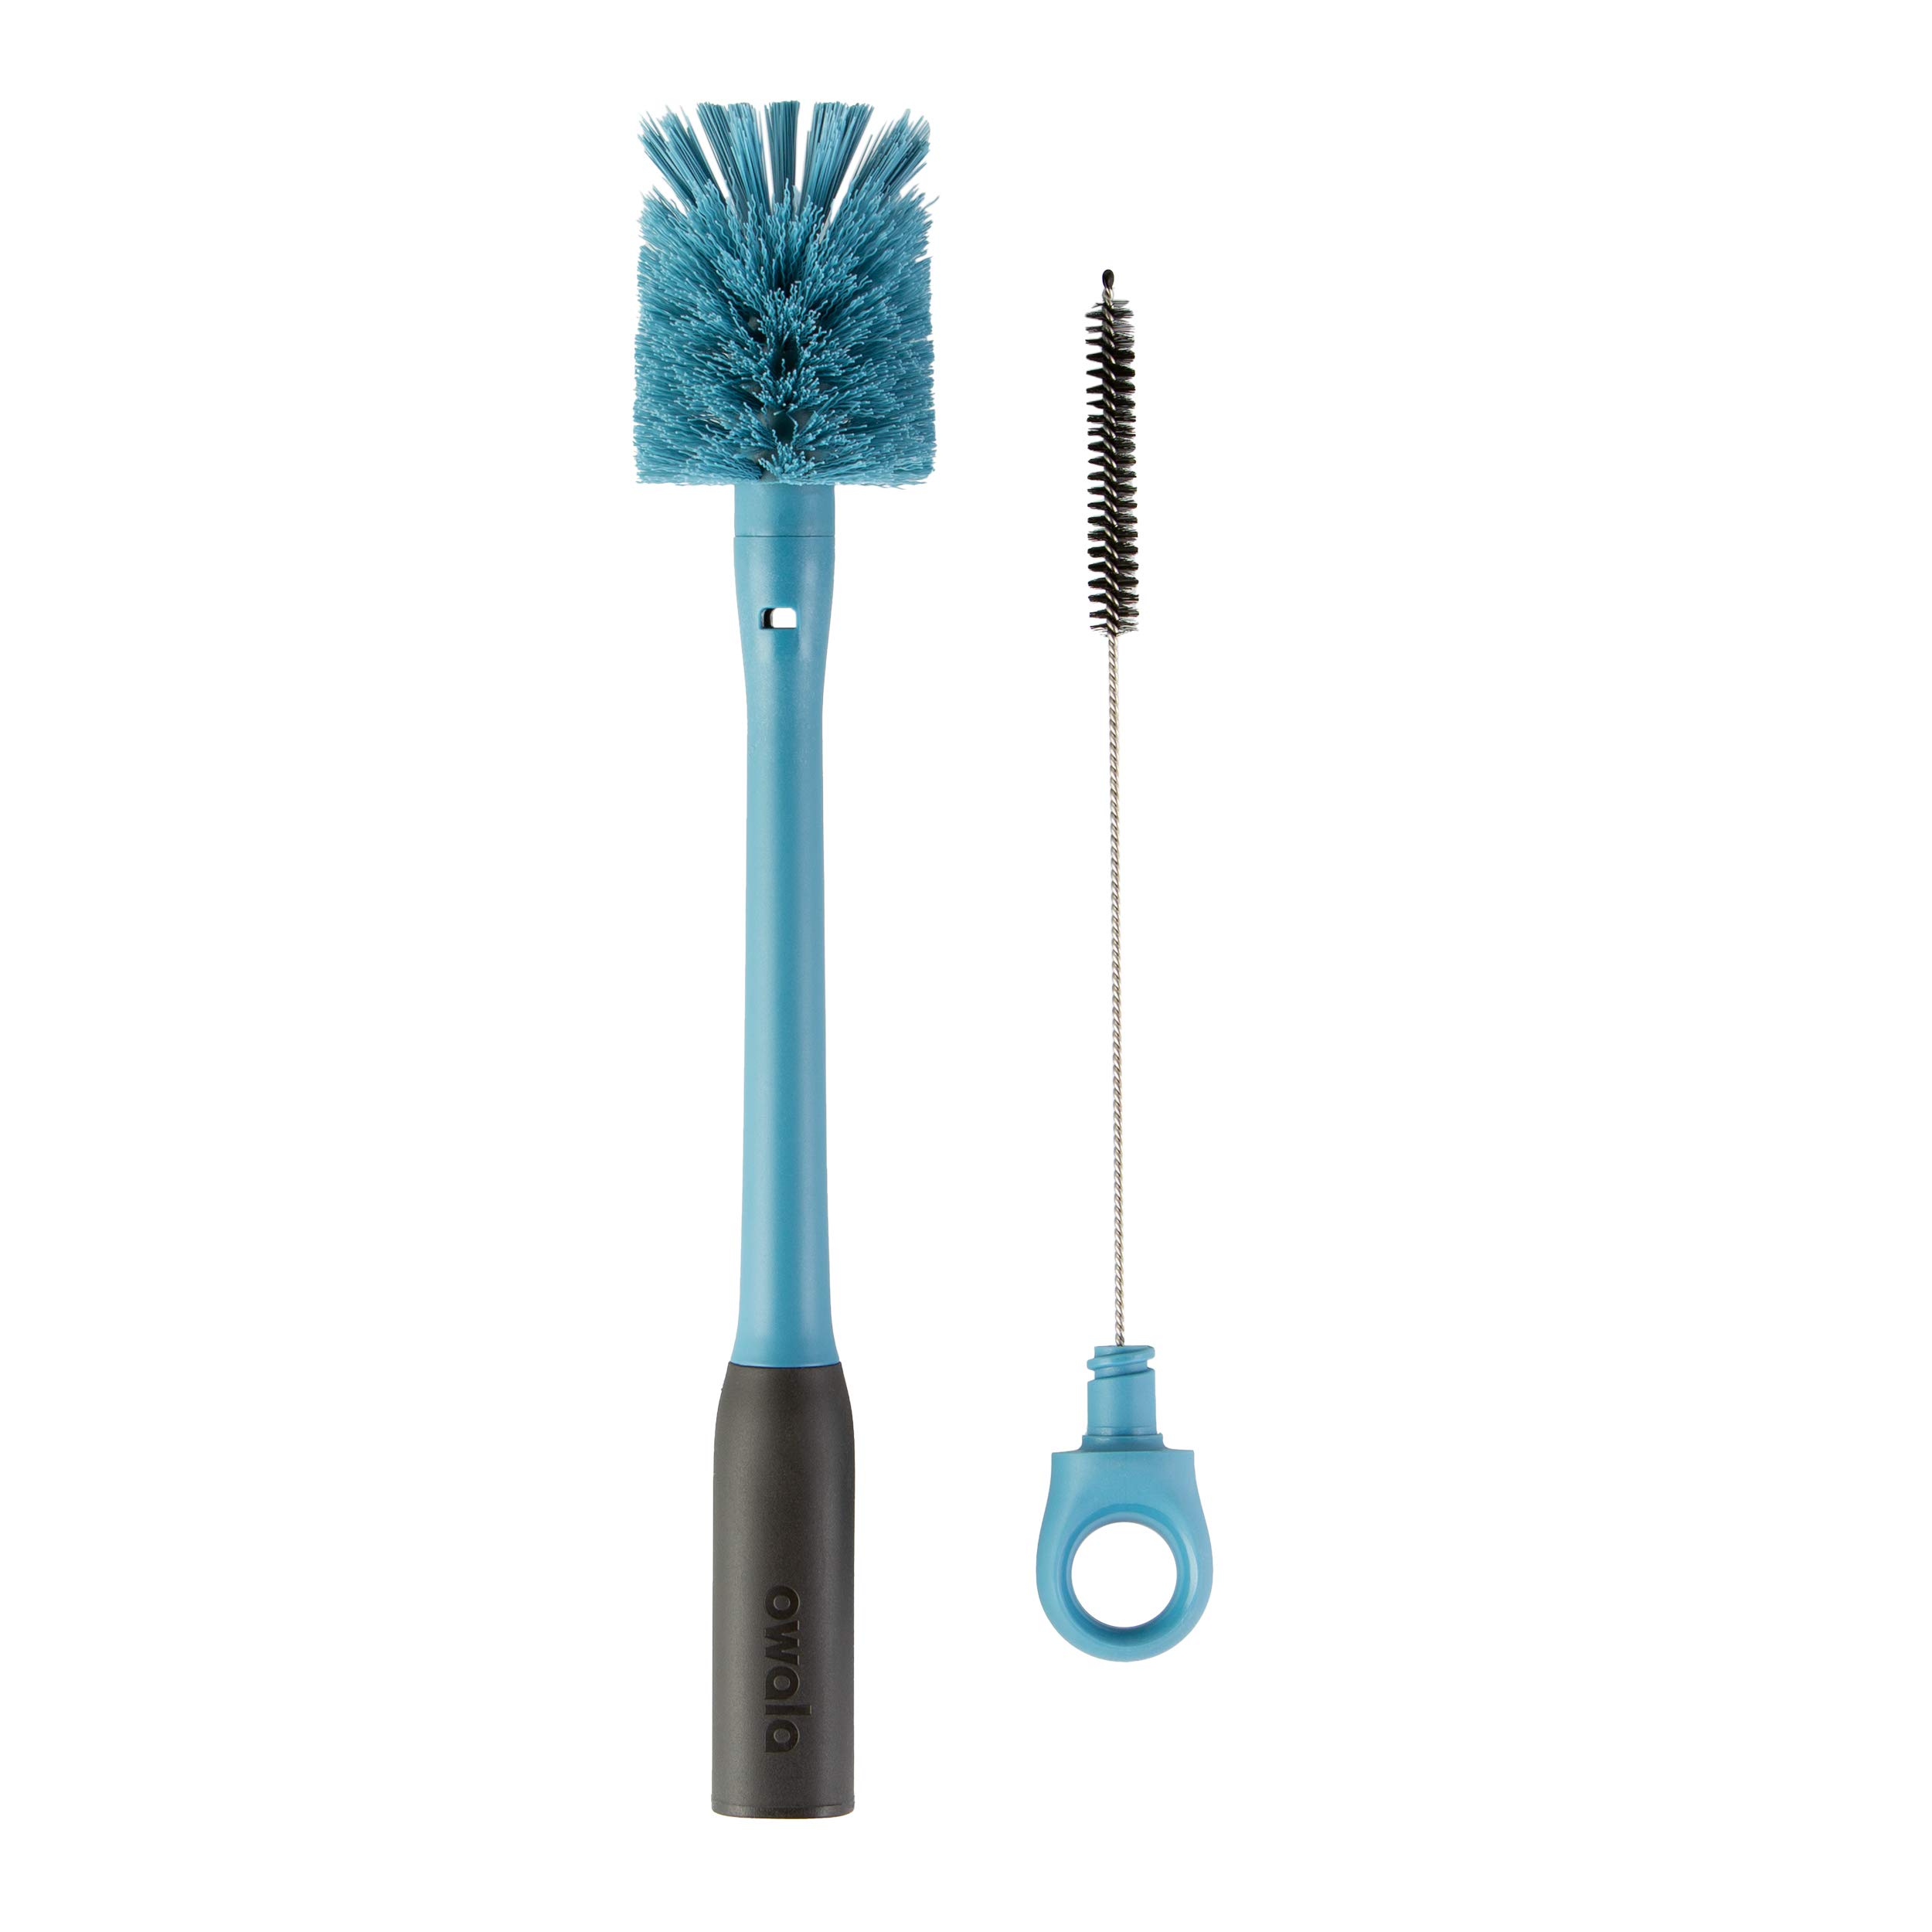 Owala 2-in-1 Water Bottle Brush Cleaner and Water Bottle Straw Cleaner Brush, Water Bottle Brush with Removable Head and Twist n’ Hide Straw Brush, Smokey Blue